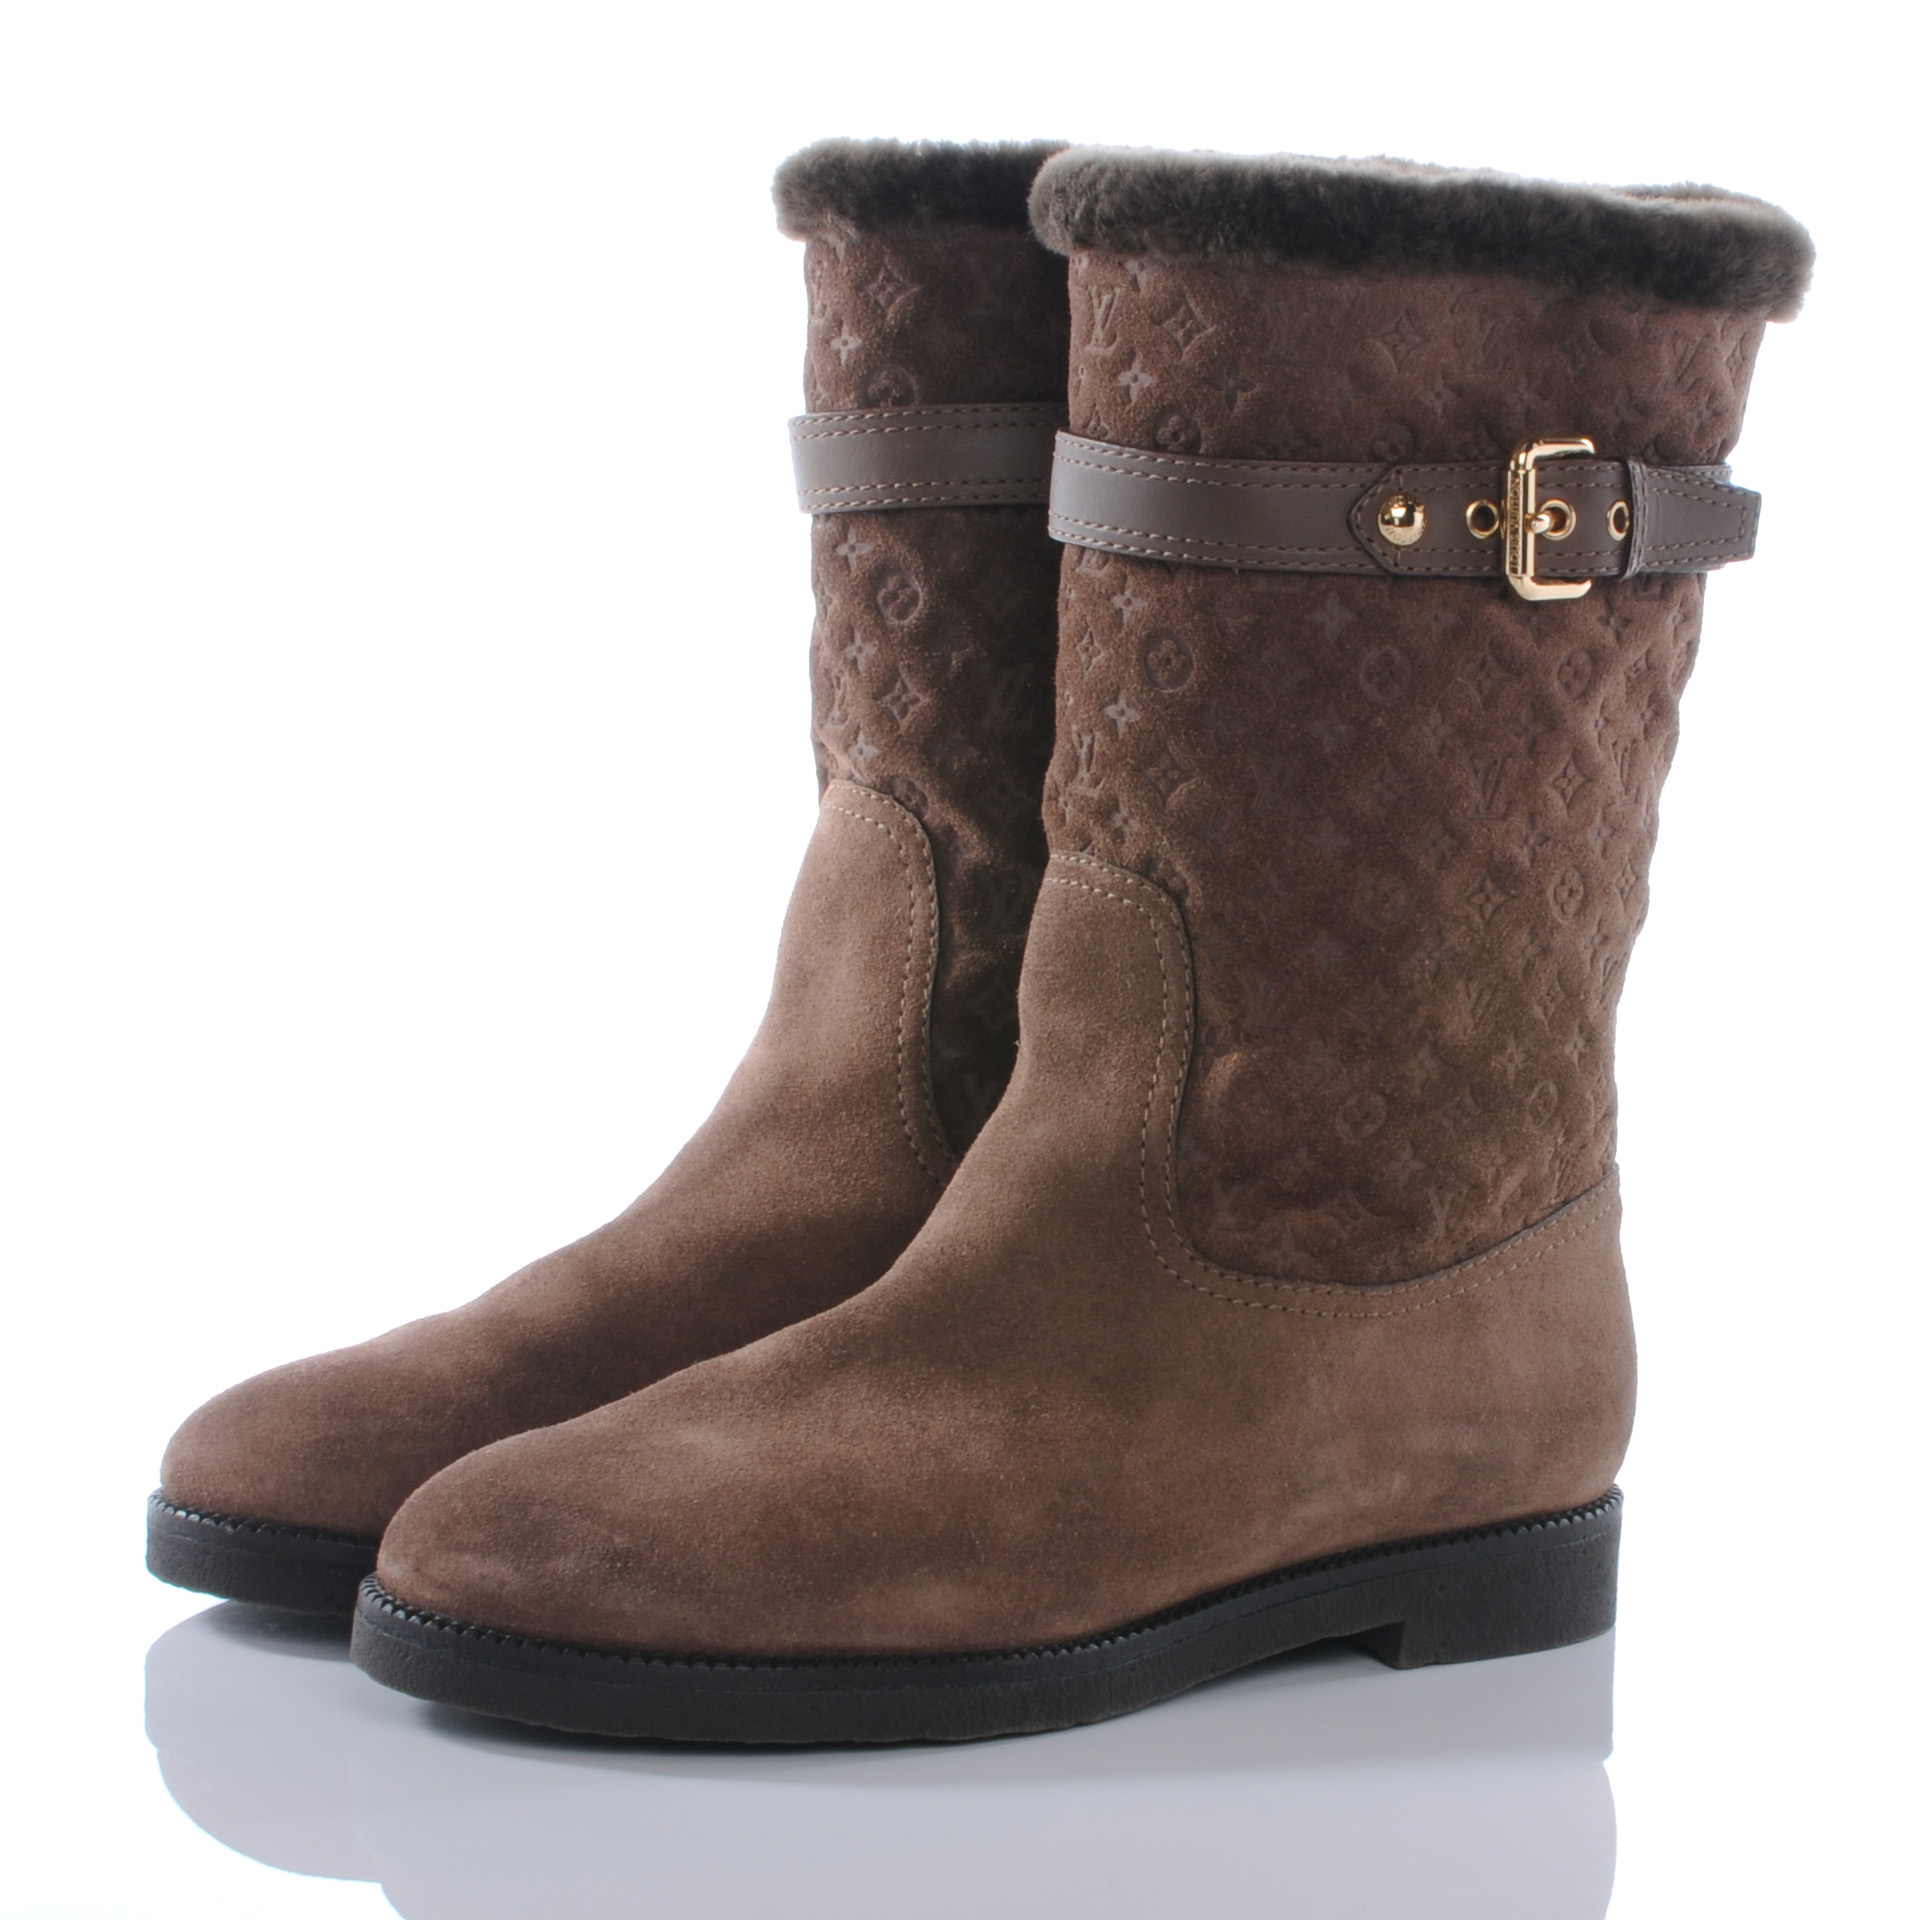 LOUIS VUITTON Suede Fur Wintry Boots 38 Brown 38522